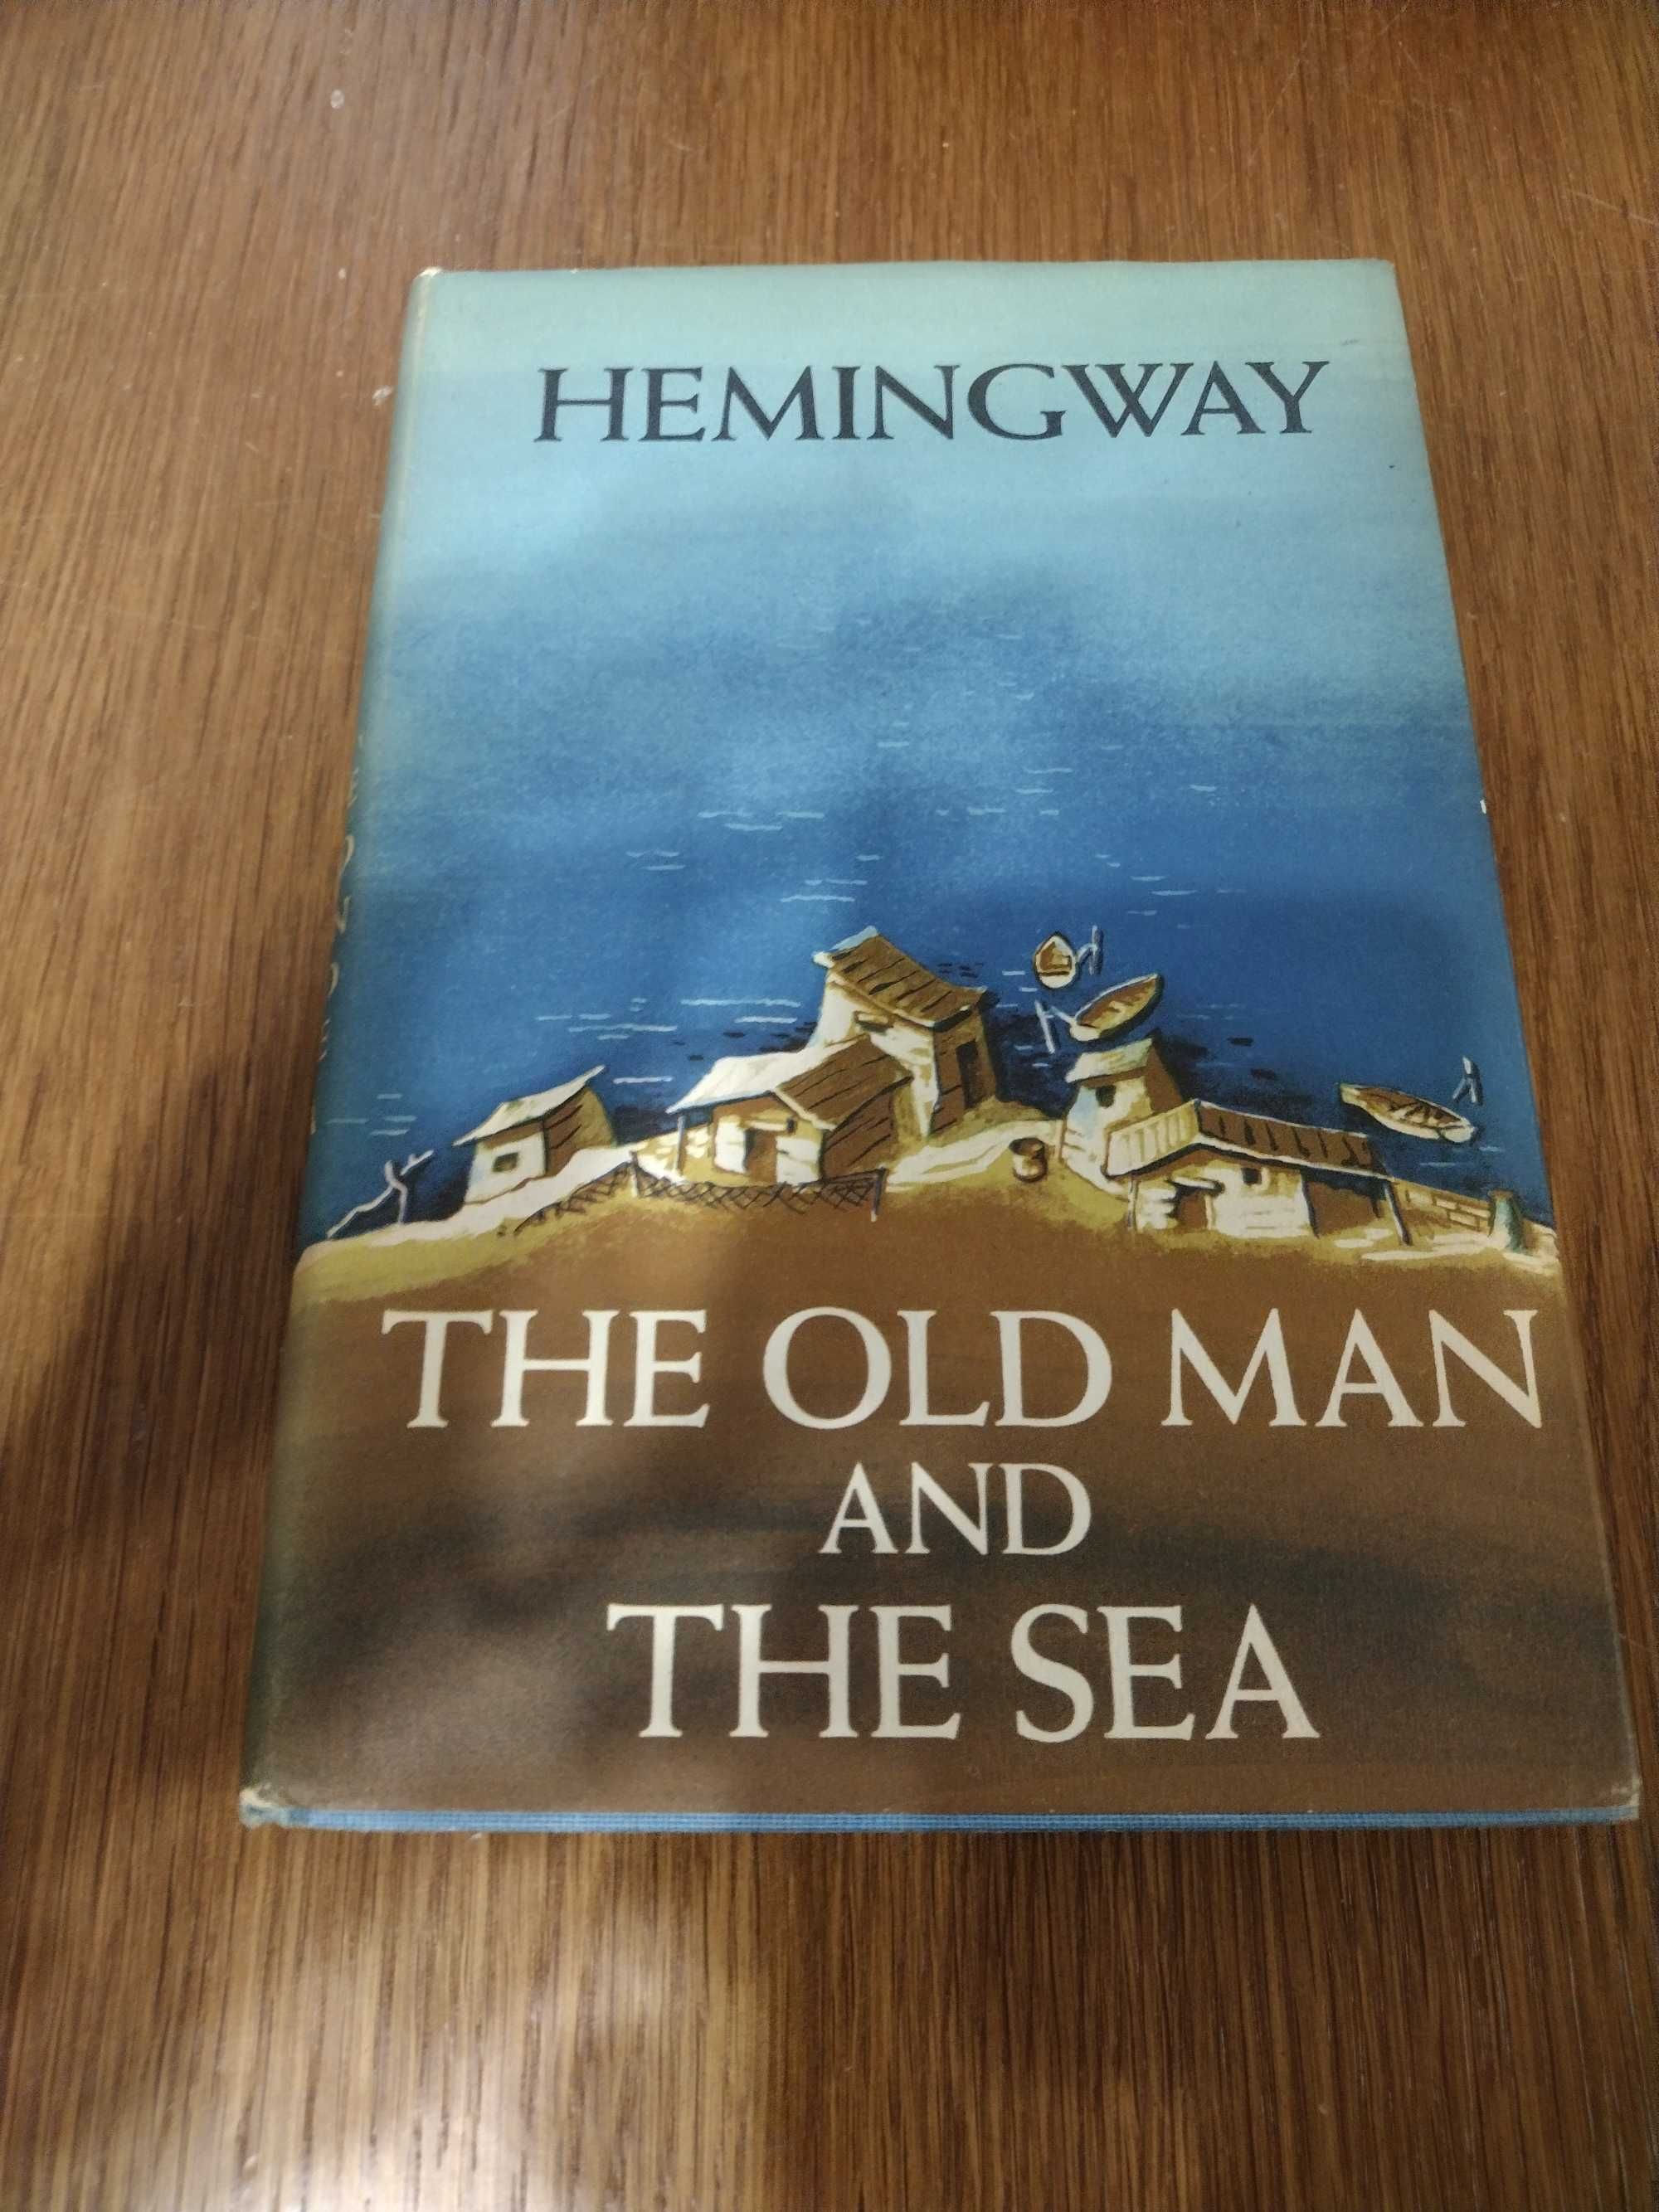 "The old man and the sea" Ernest Hamingway